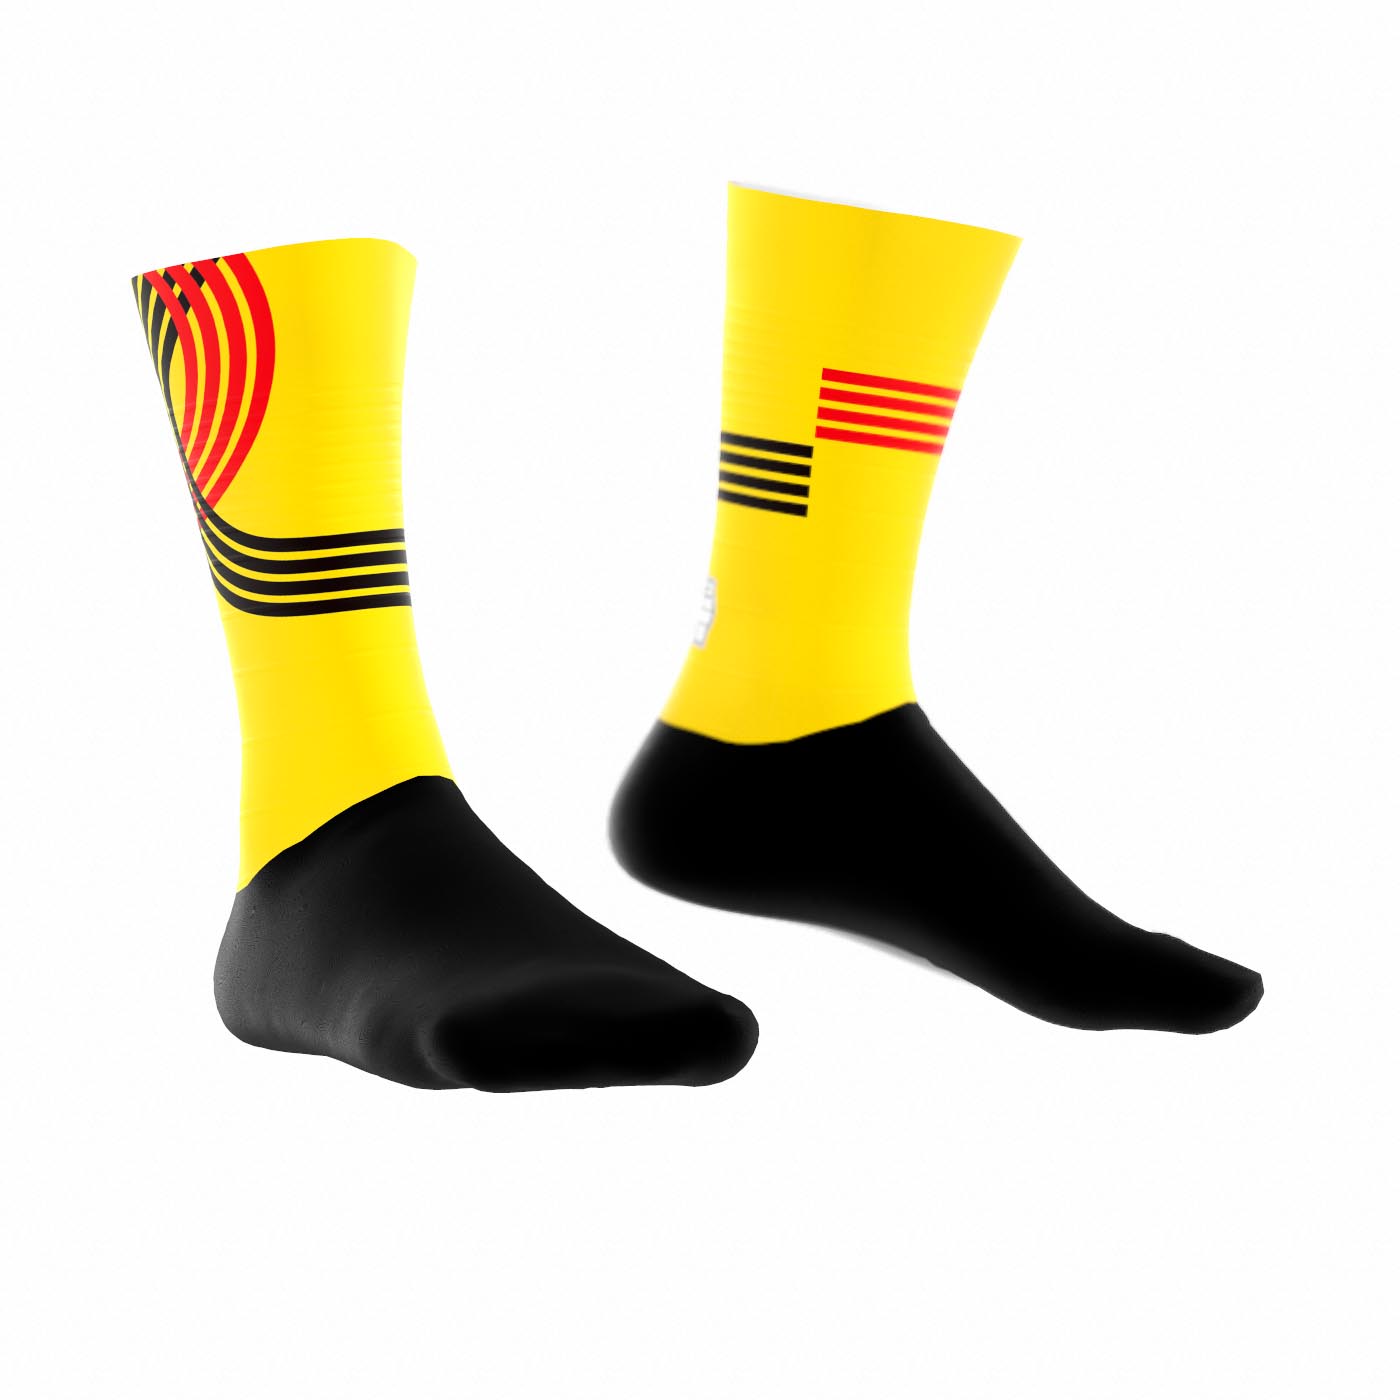 Official Team Belgium Technical Socks Yellow – Olympic Edition